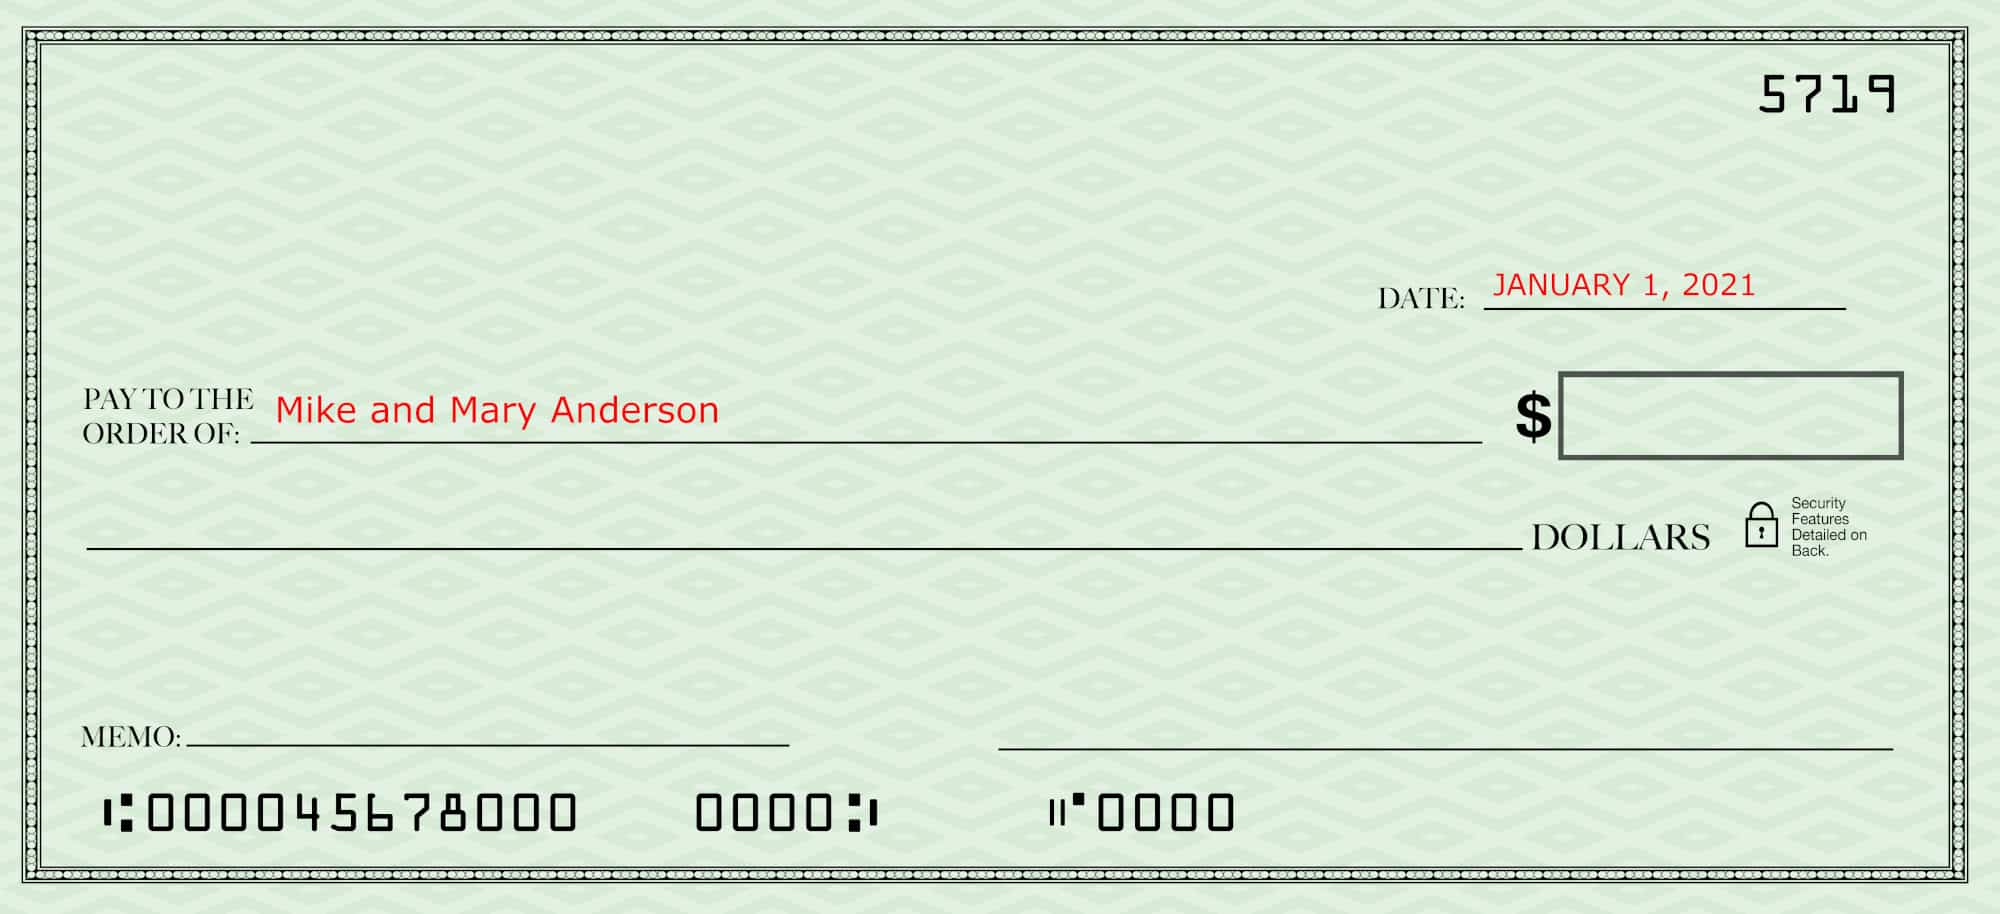 Filling out a check--blank check with just the date and payee filled in